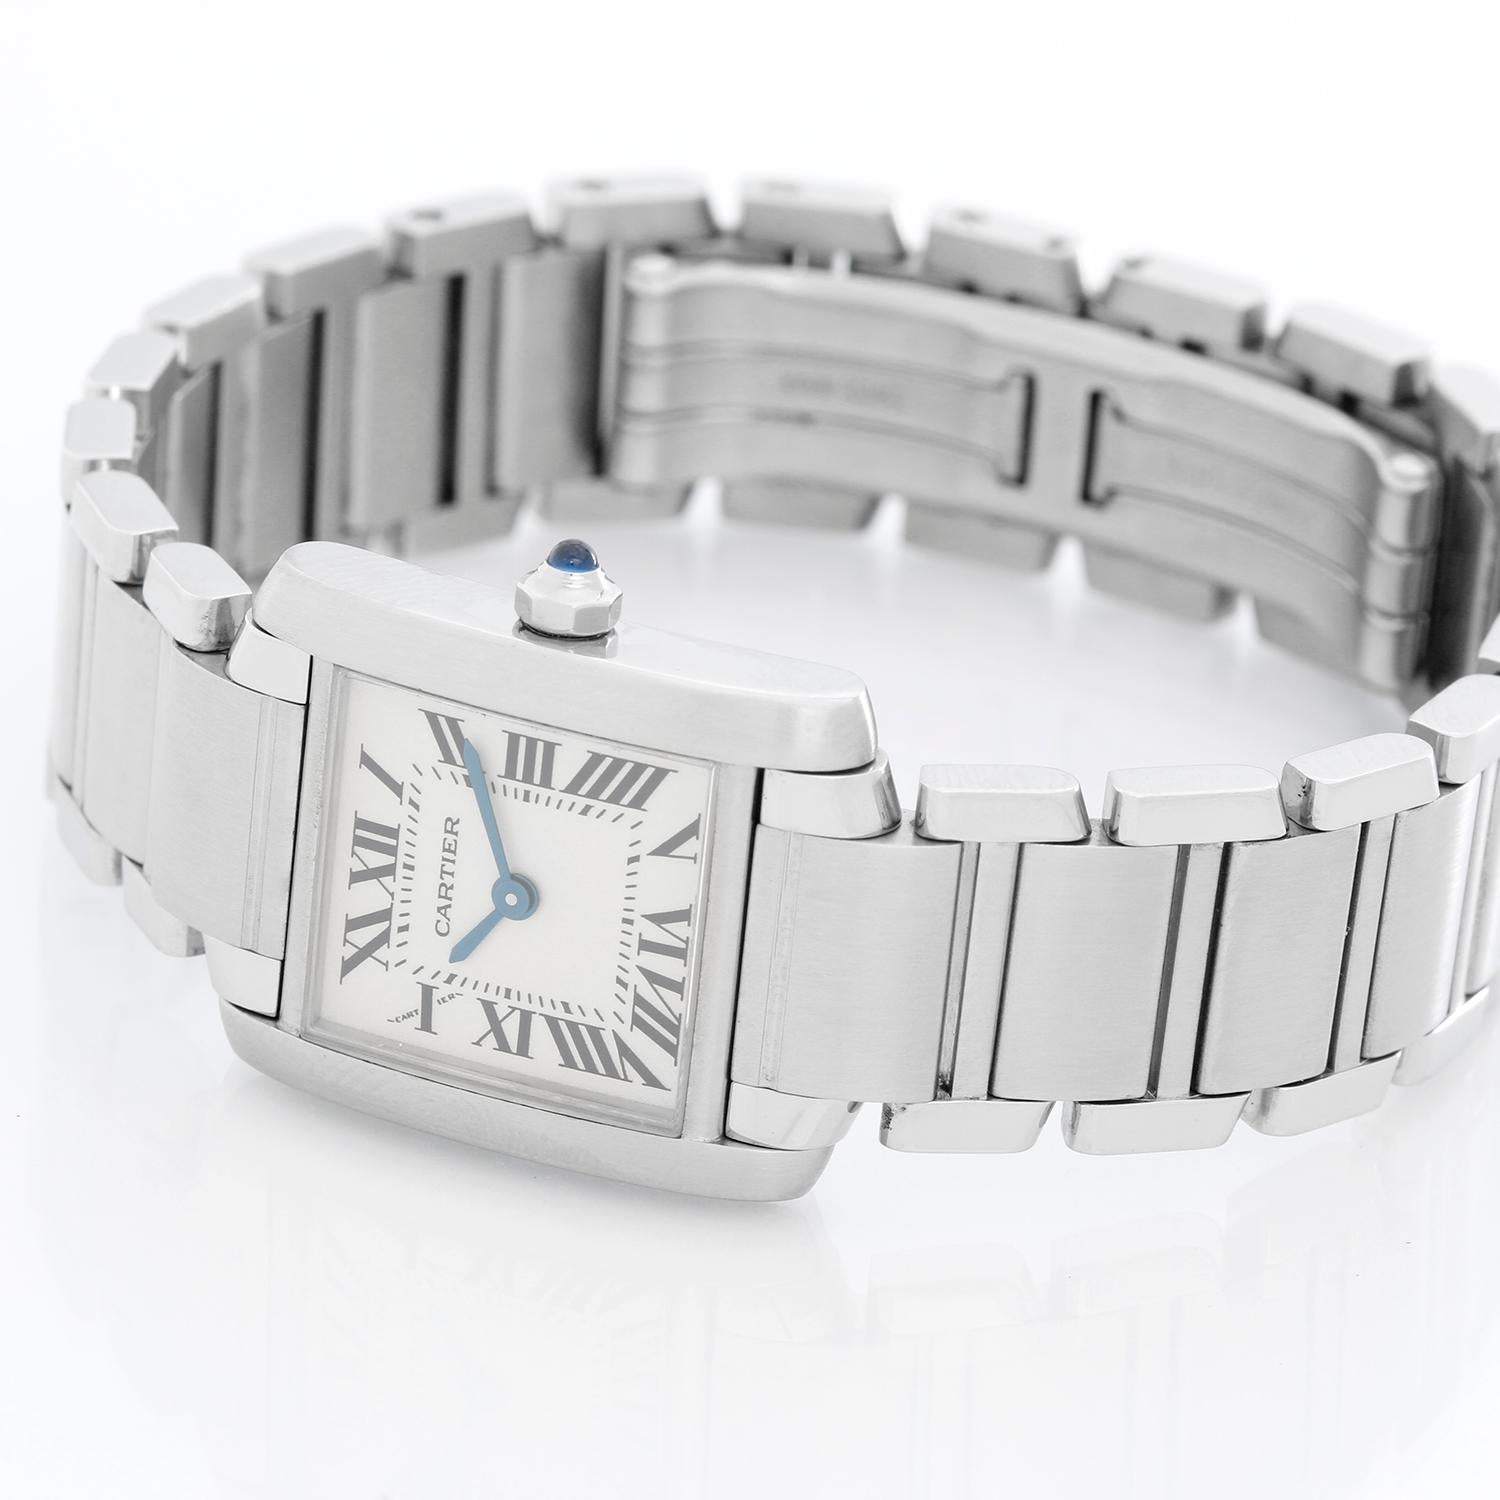 Cartier Tank Francaise Stainless  Steel Ladies Watch W51008Q3 - Quartz. Stainless Steel (20 x 25mm ). Ivory colored dial with black Roman numerals. Stainless Steel Cartier Tank Francaise bracelet with deployant clasp.. Pre-owned with custom box and